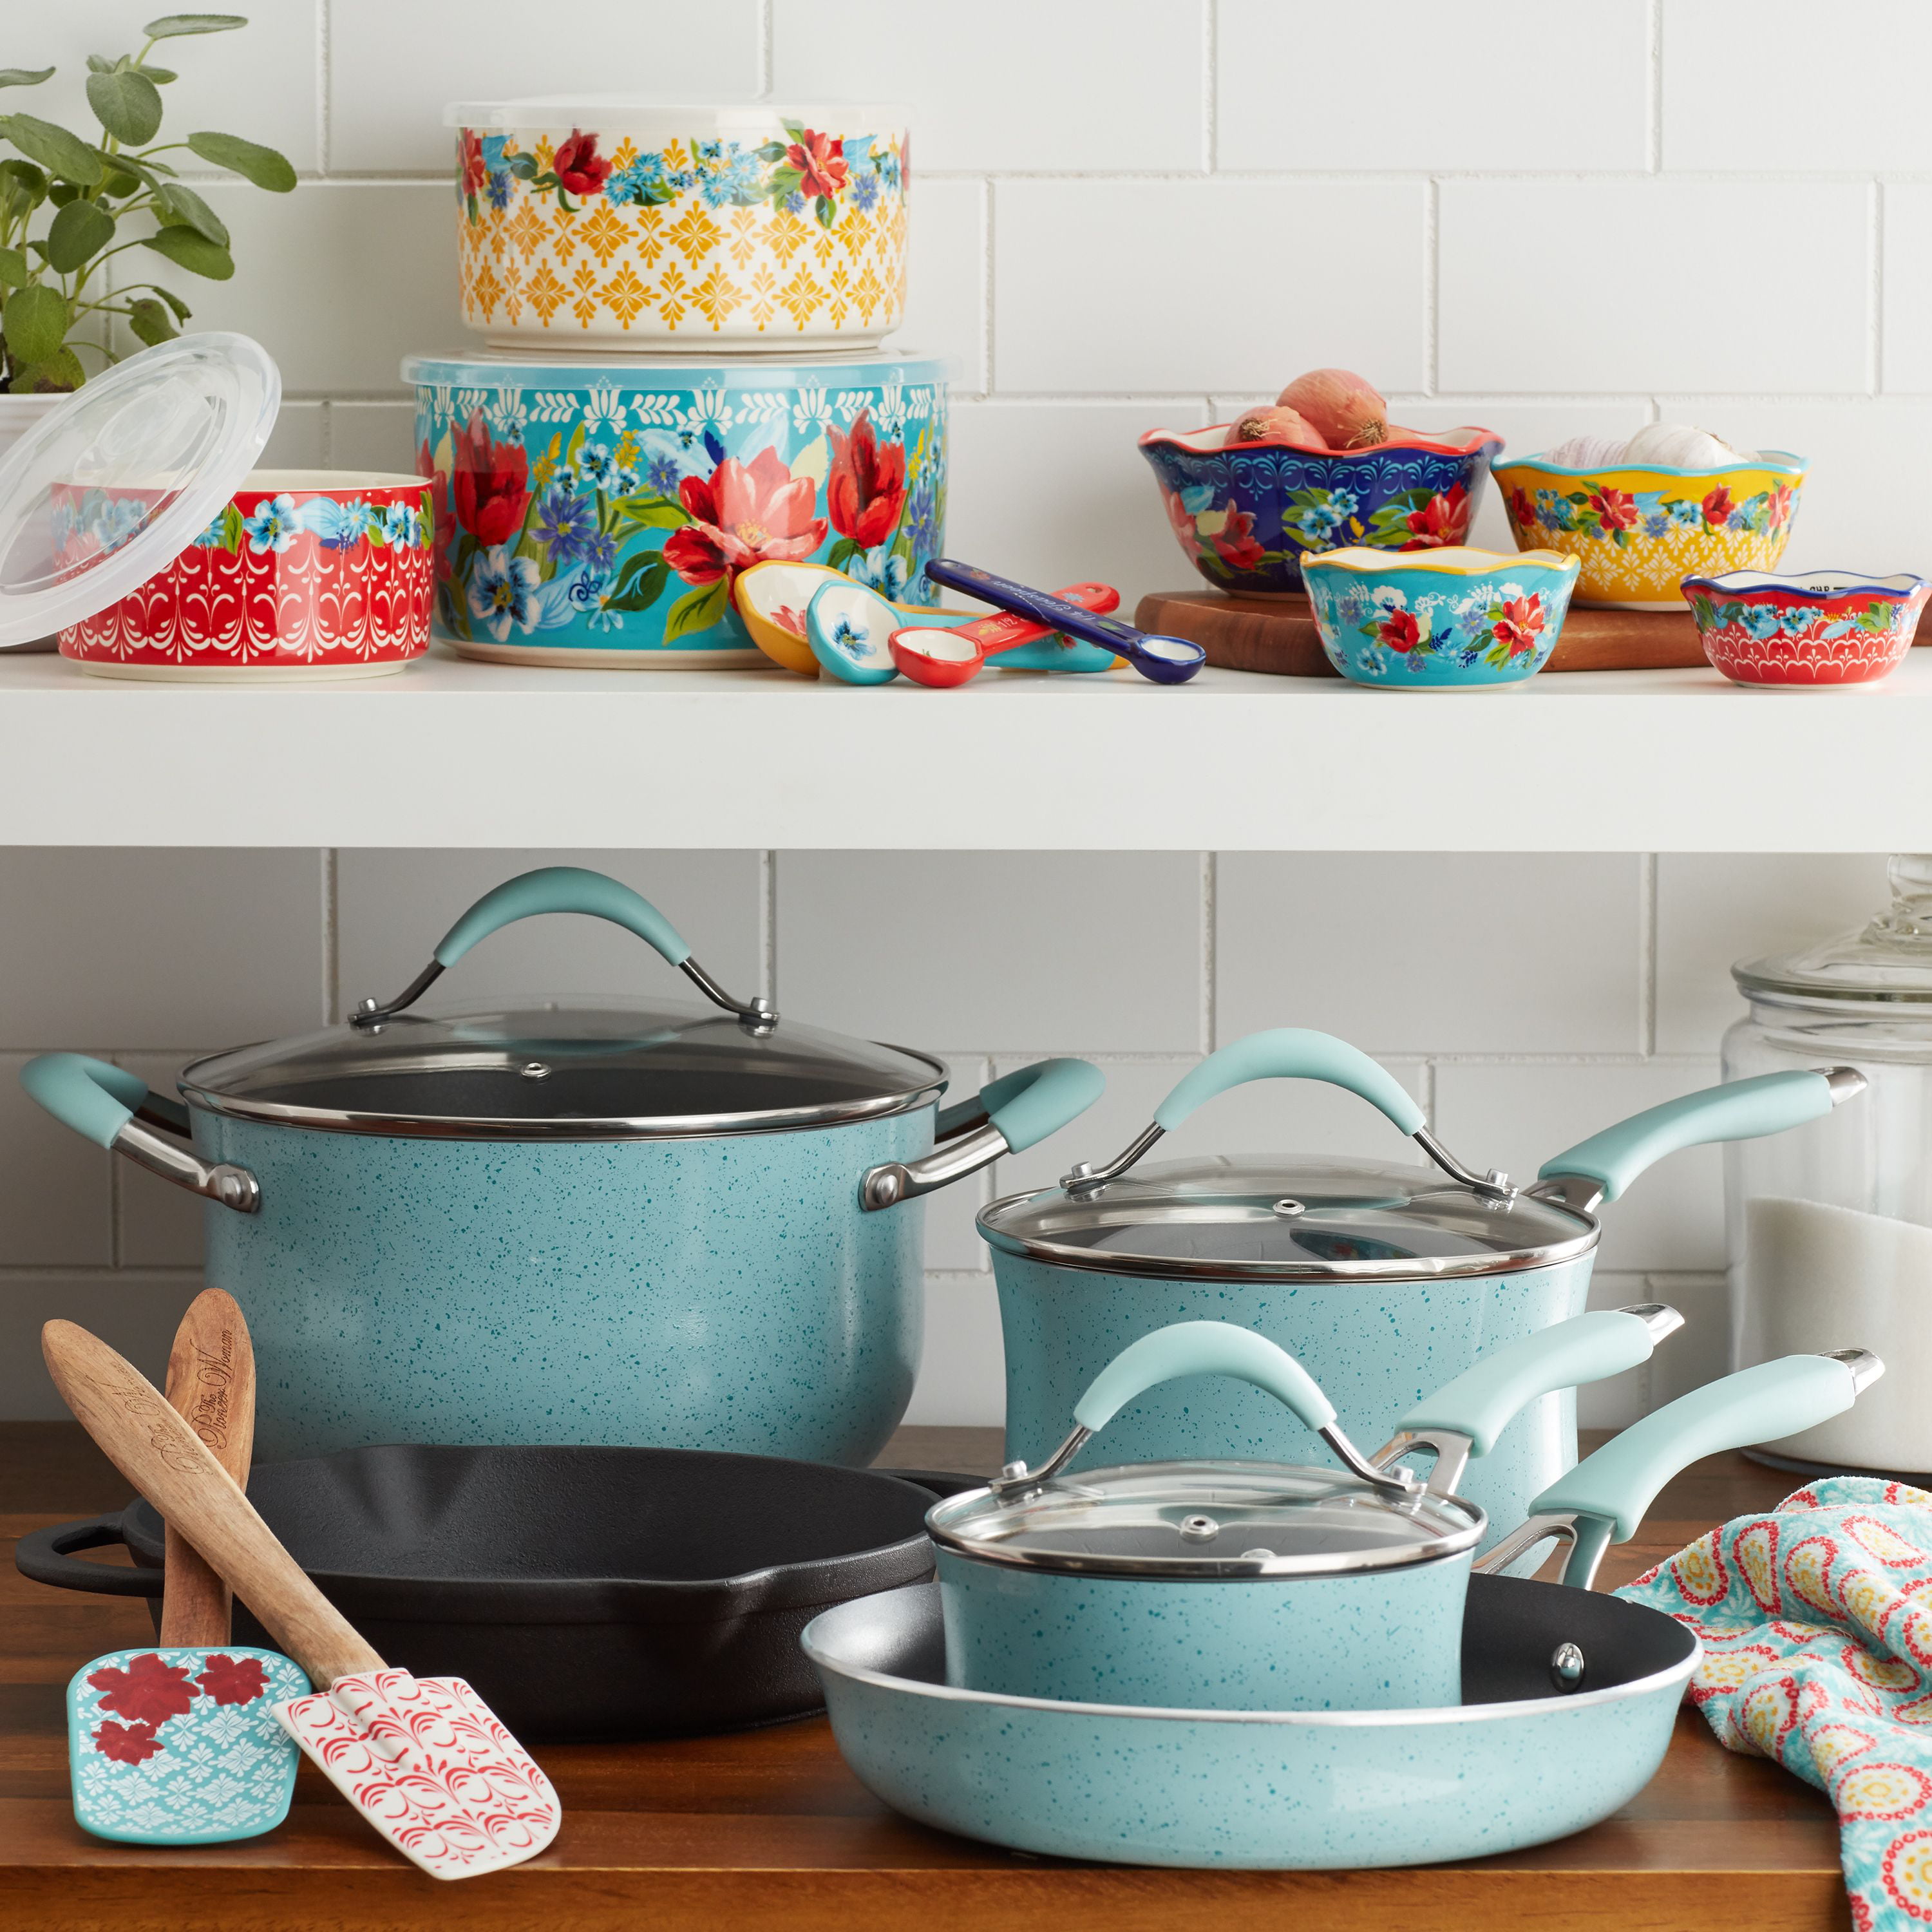 Walmart is having a sale on Pioneer Woman cookware and more